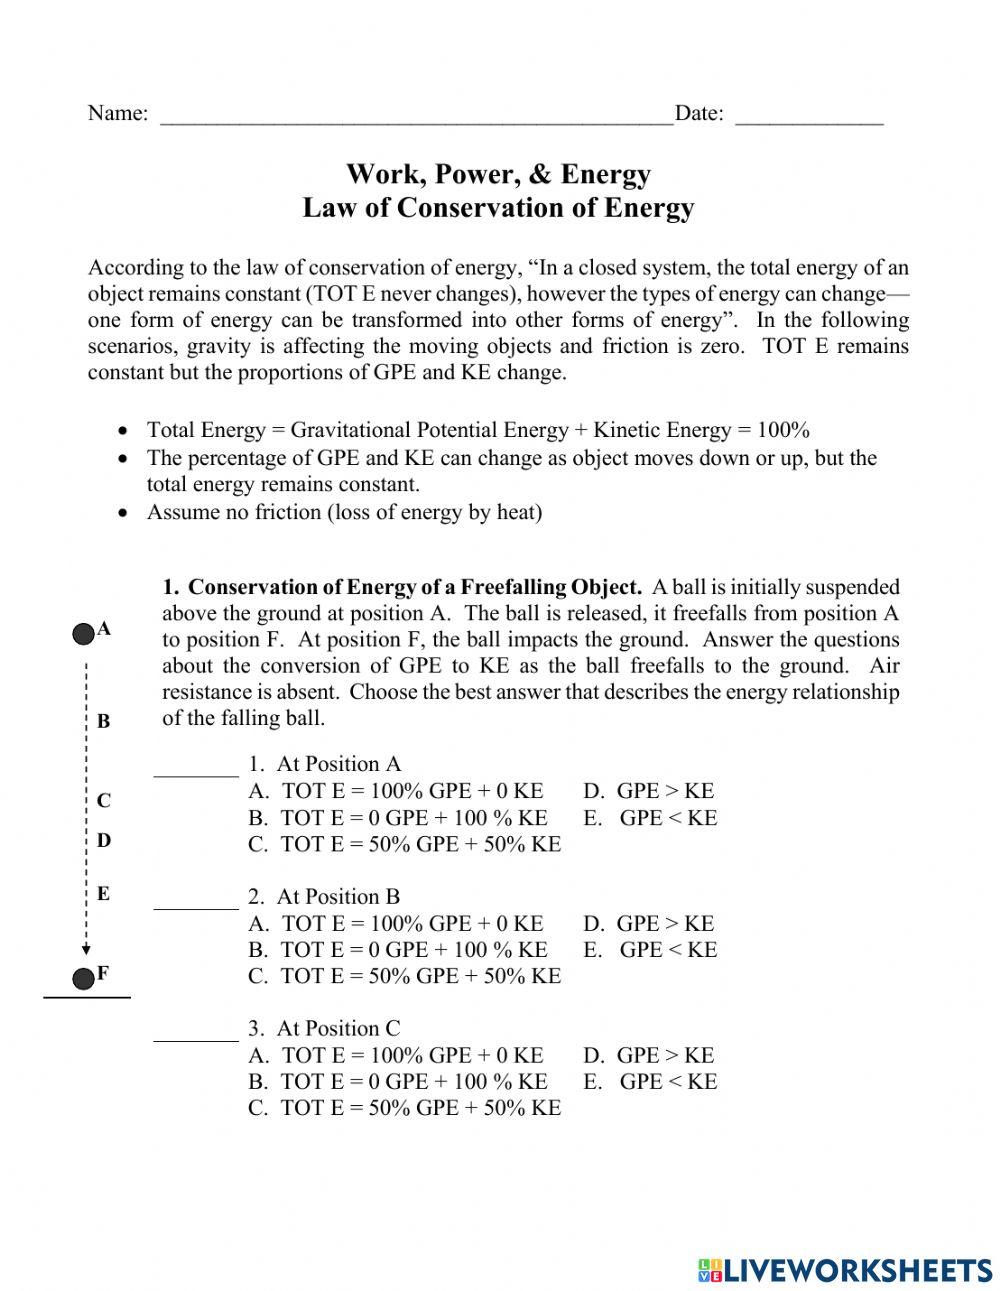 Conservation of Energy Diagrams -1